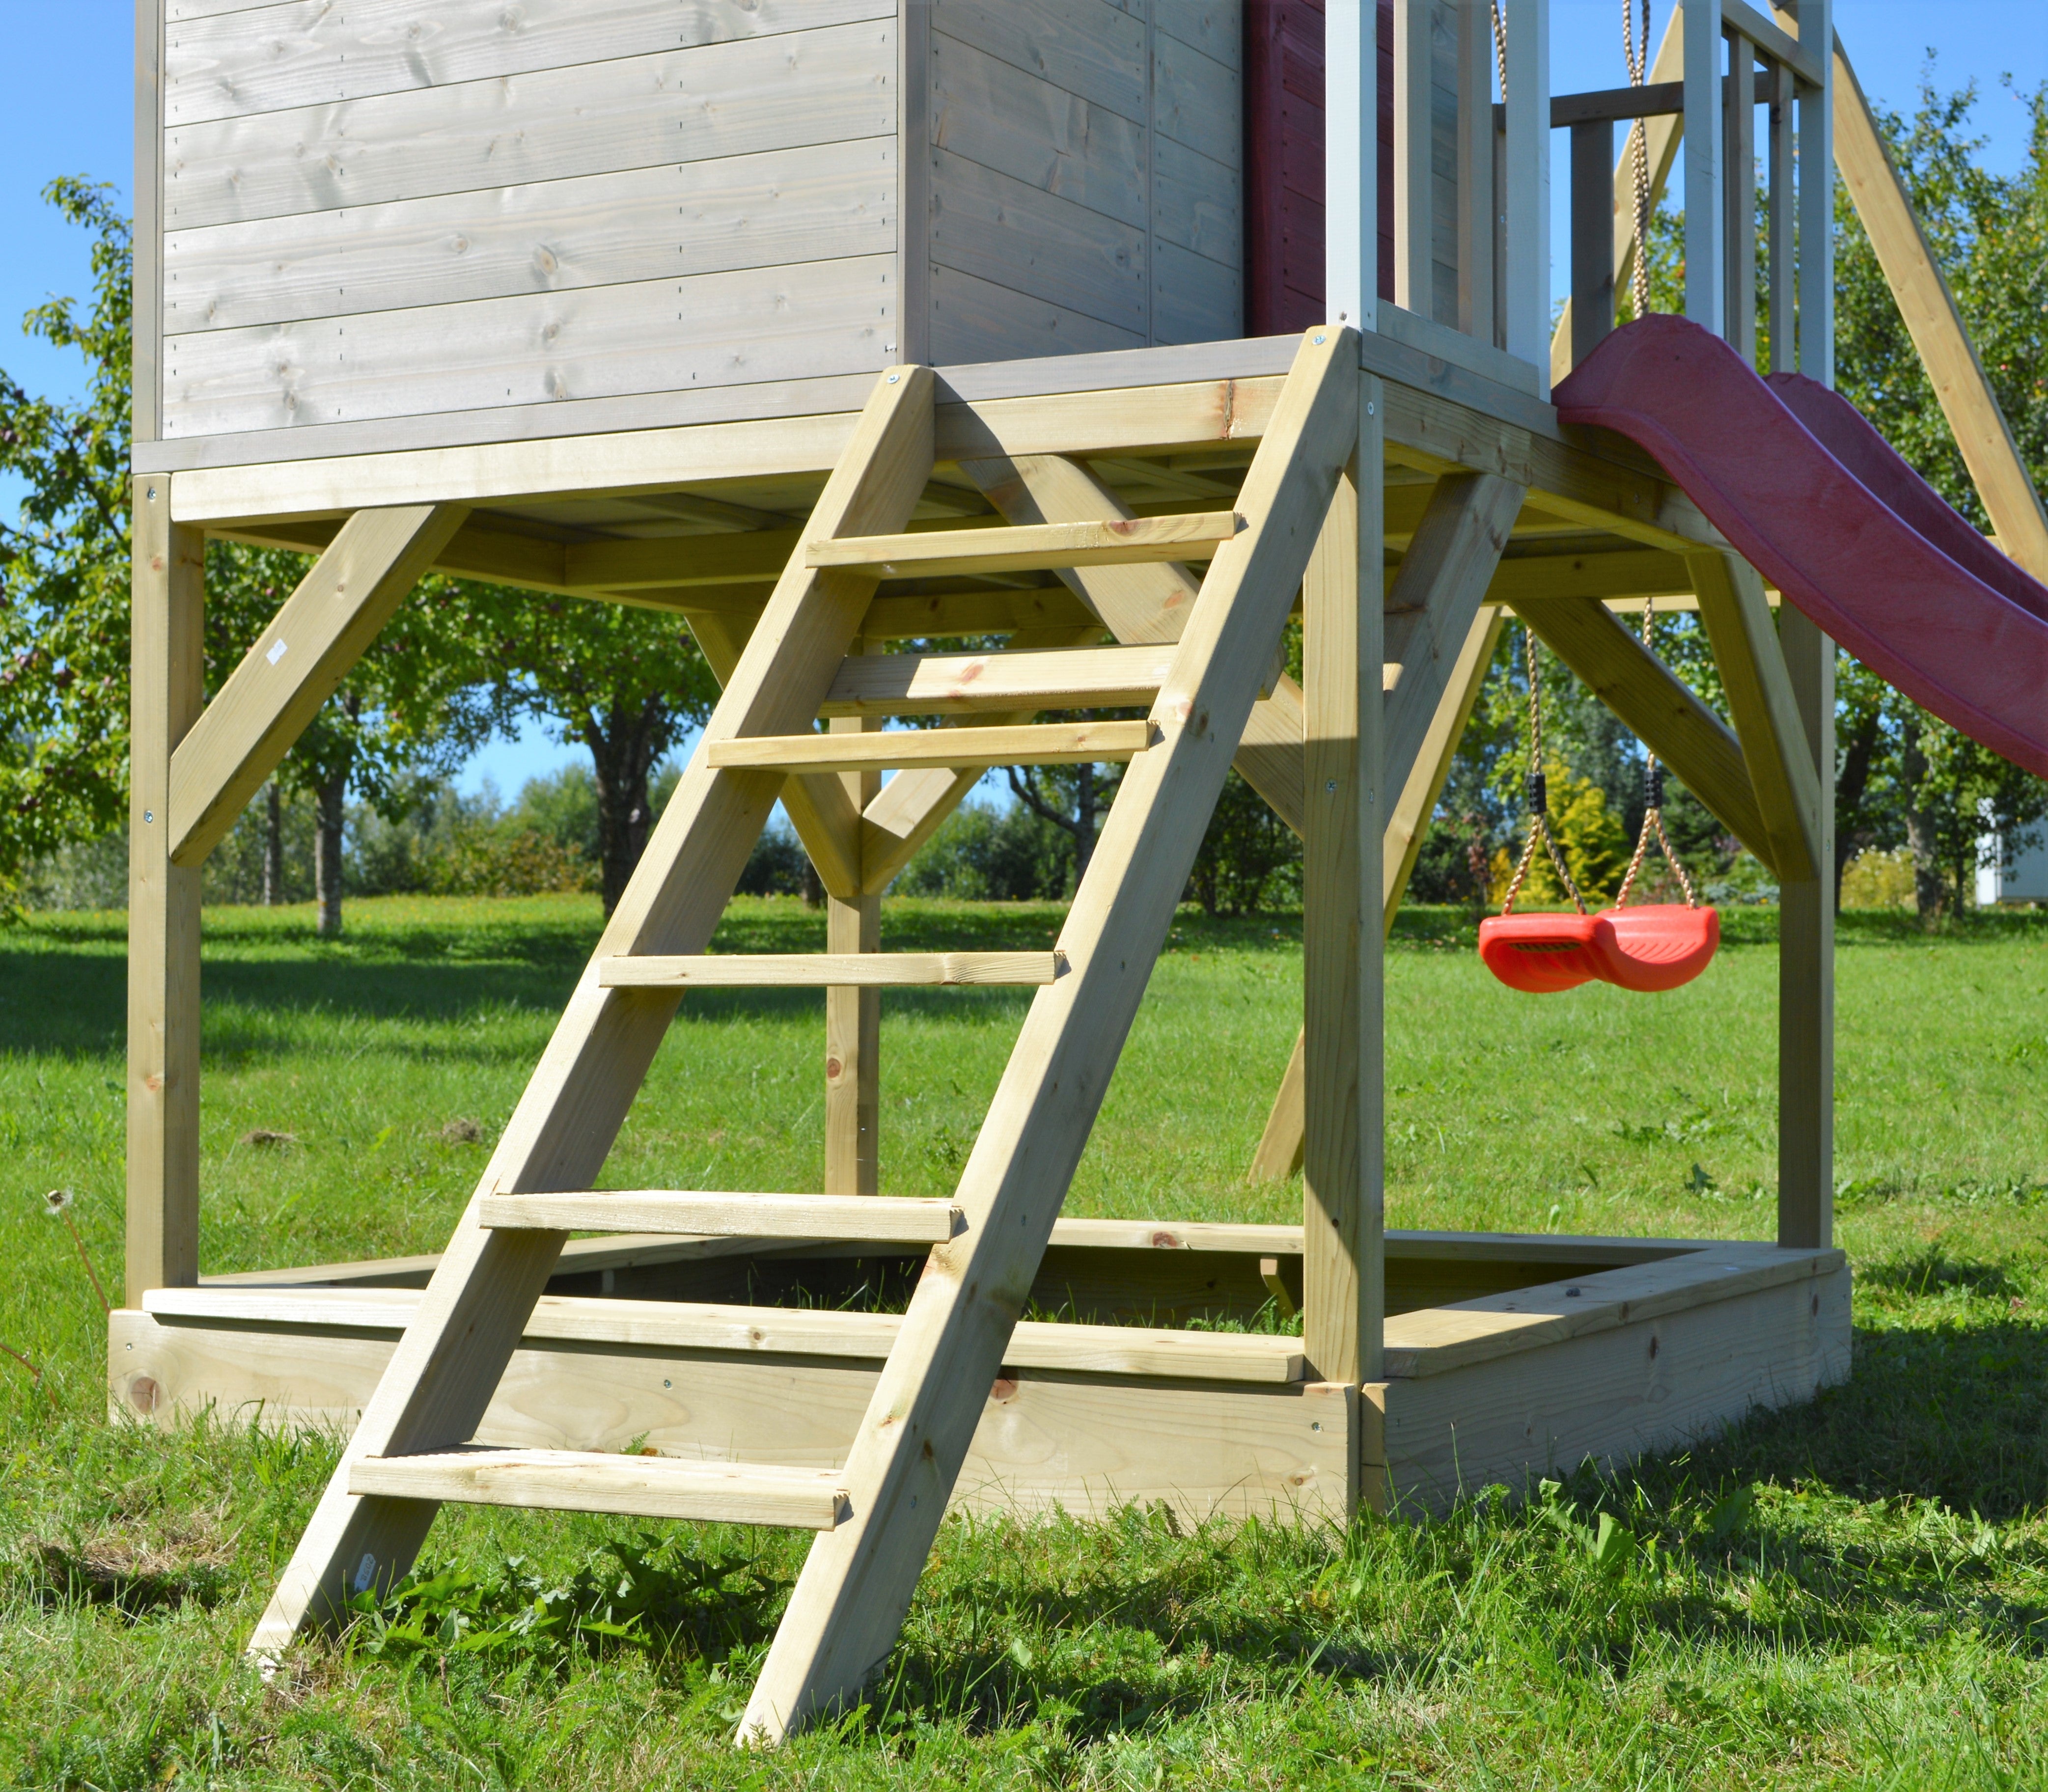 M10R Nordic Adventure House with Platform, Slide and Single Swing